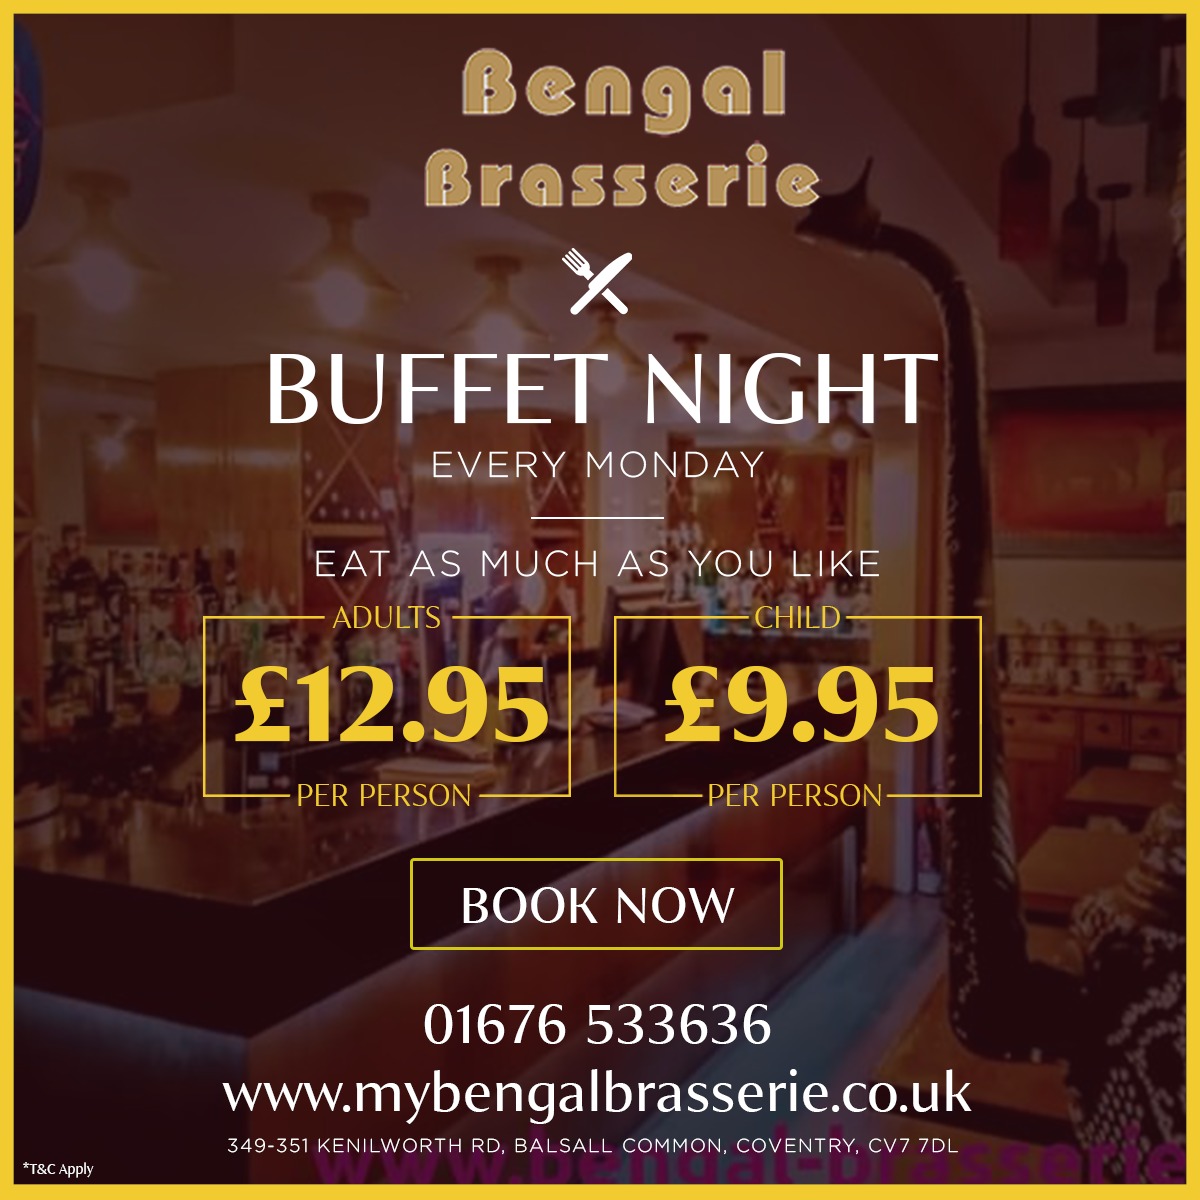 The Bengal Brasserie booking 